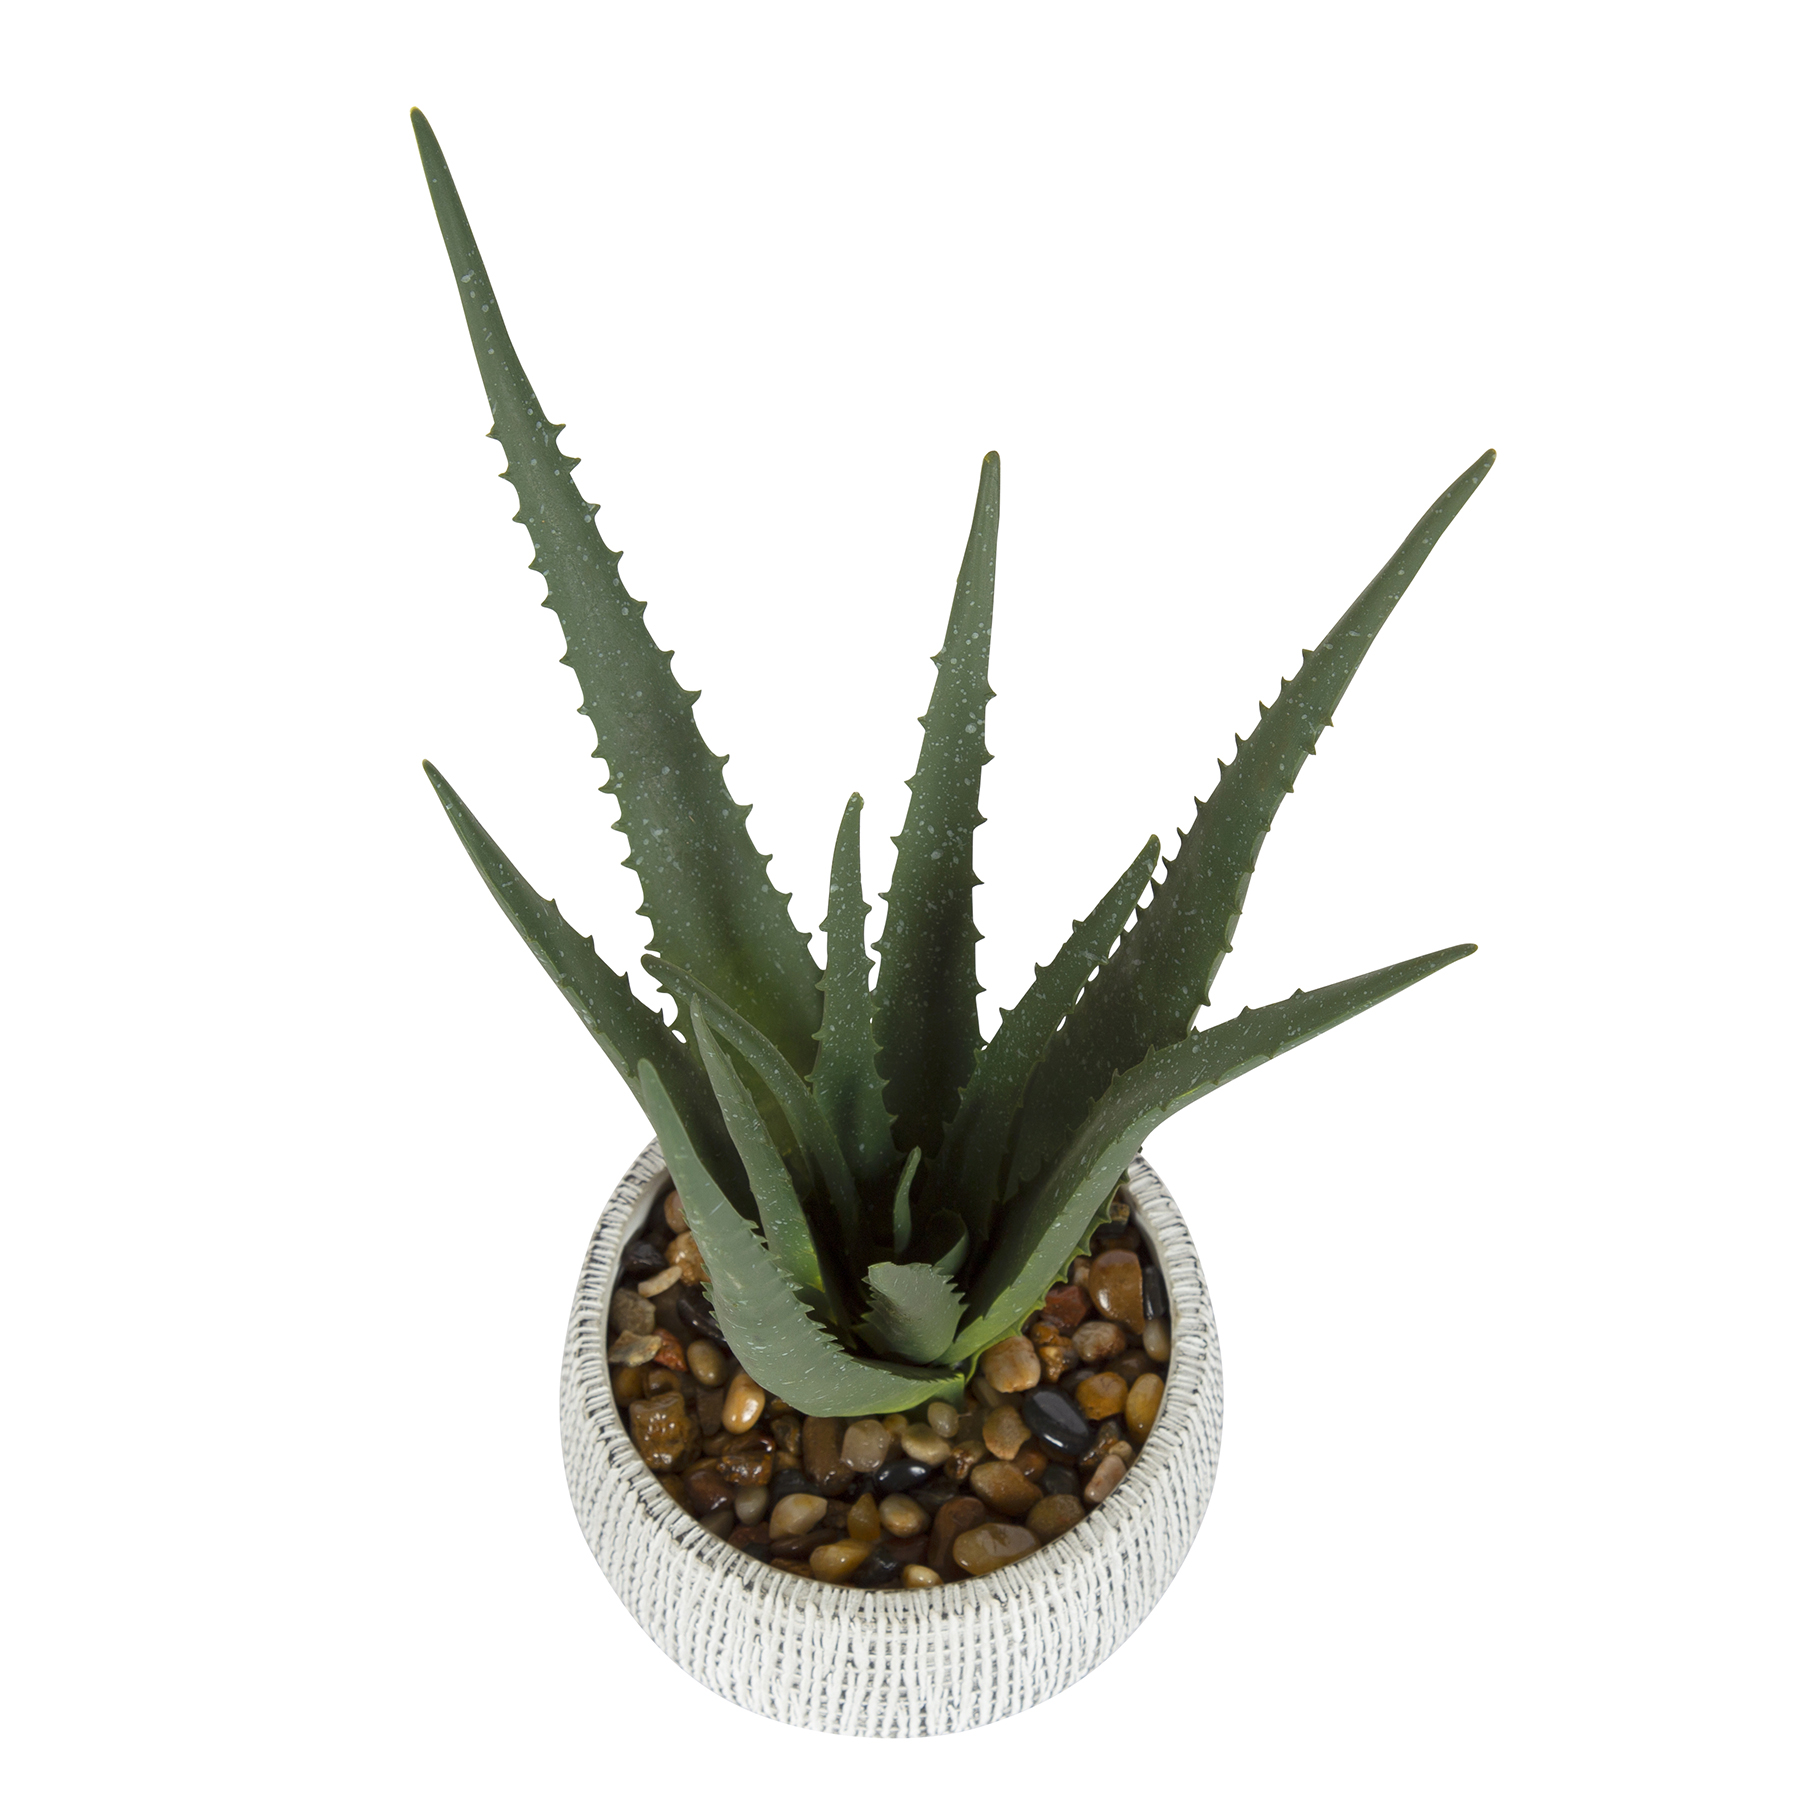 11" Artificial Aloe Plant in White and Black Stone Planter by Better Homes & Gardens - image 3 of 5